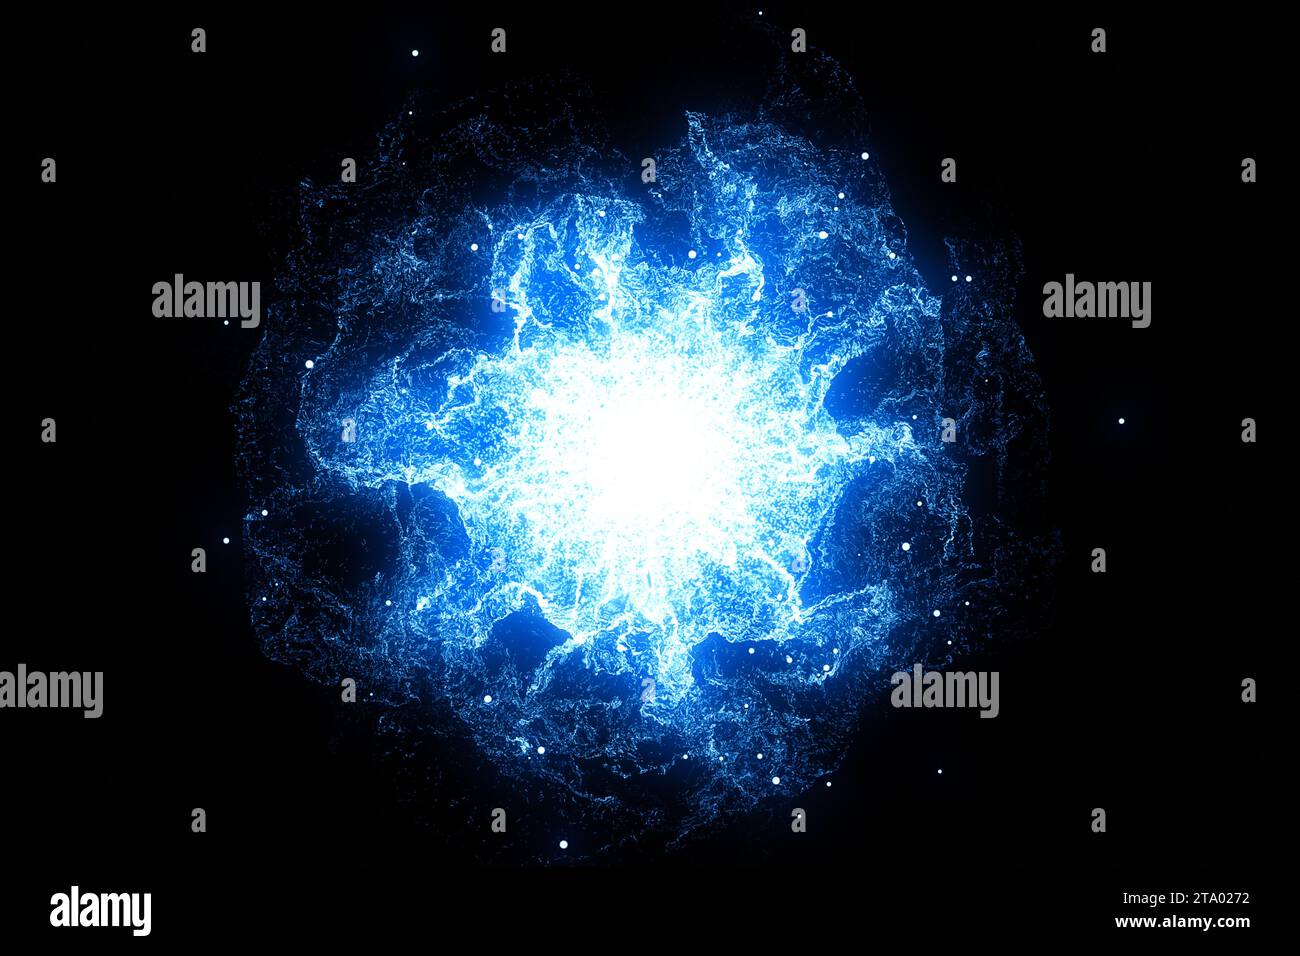 3D rendering, abstract cosmic explosion shockwave blue energy on black background, texture effect Stock Photo